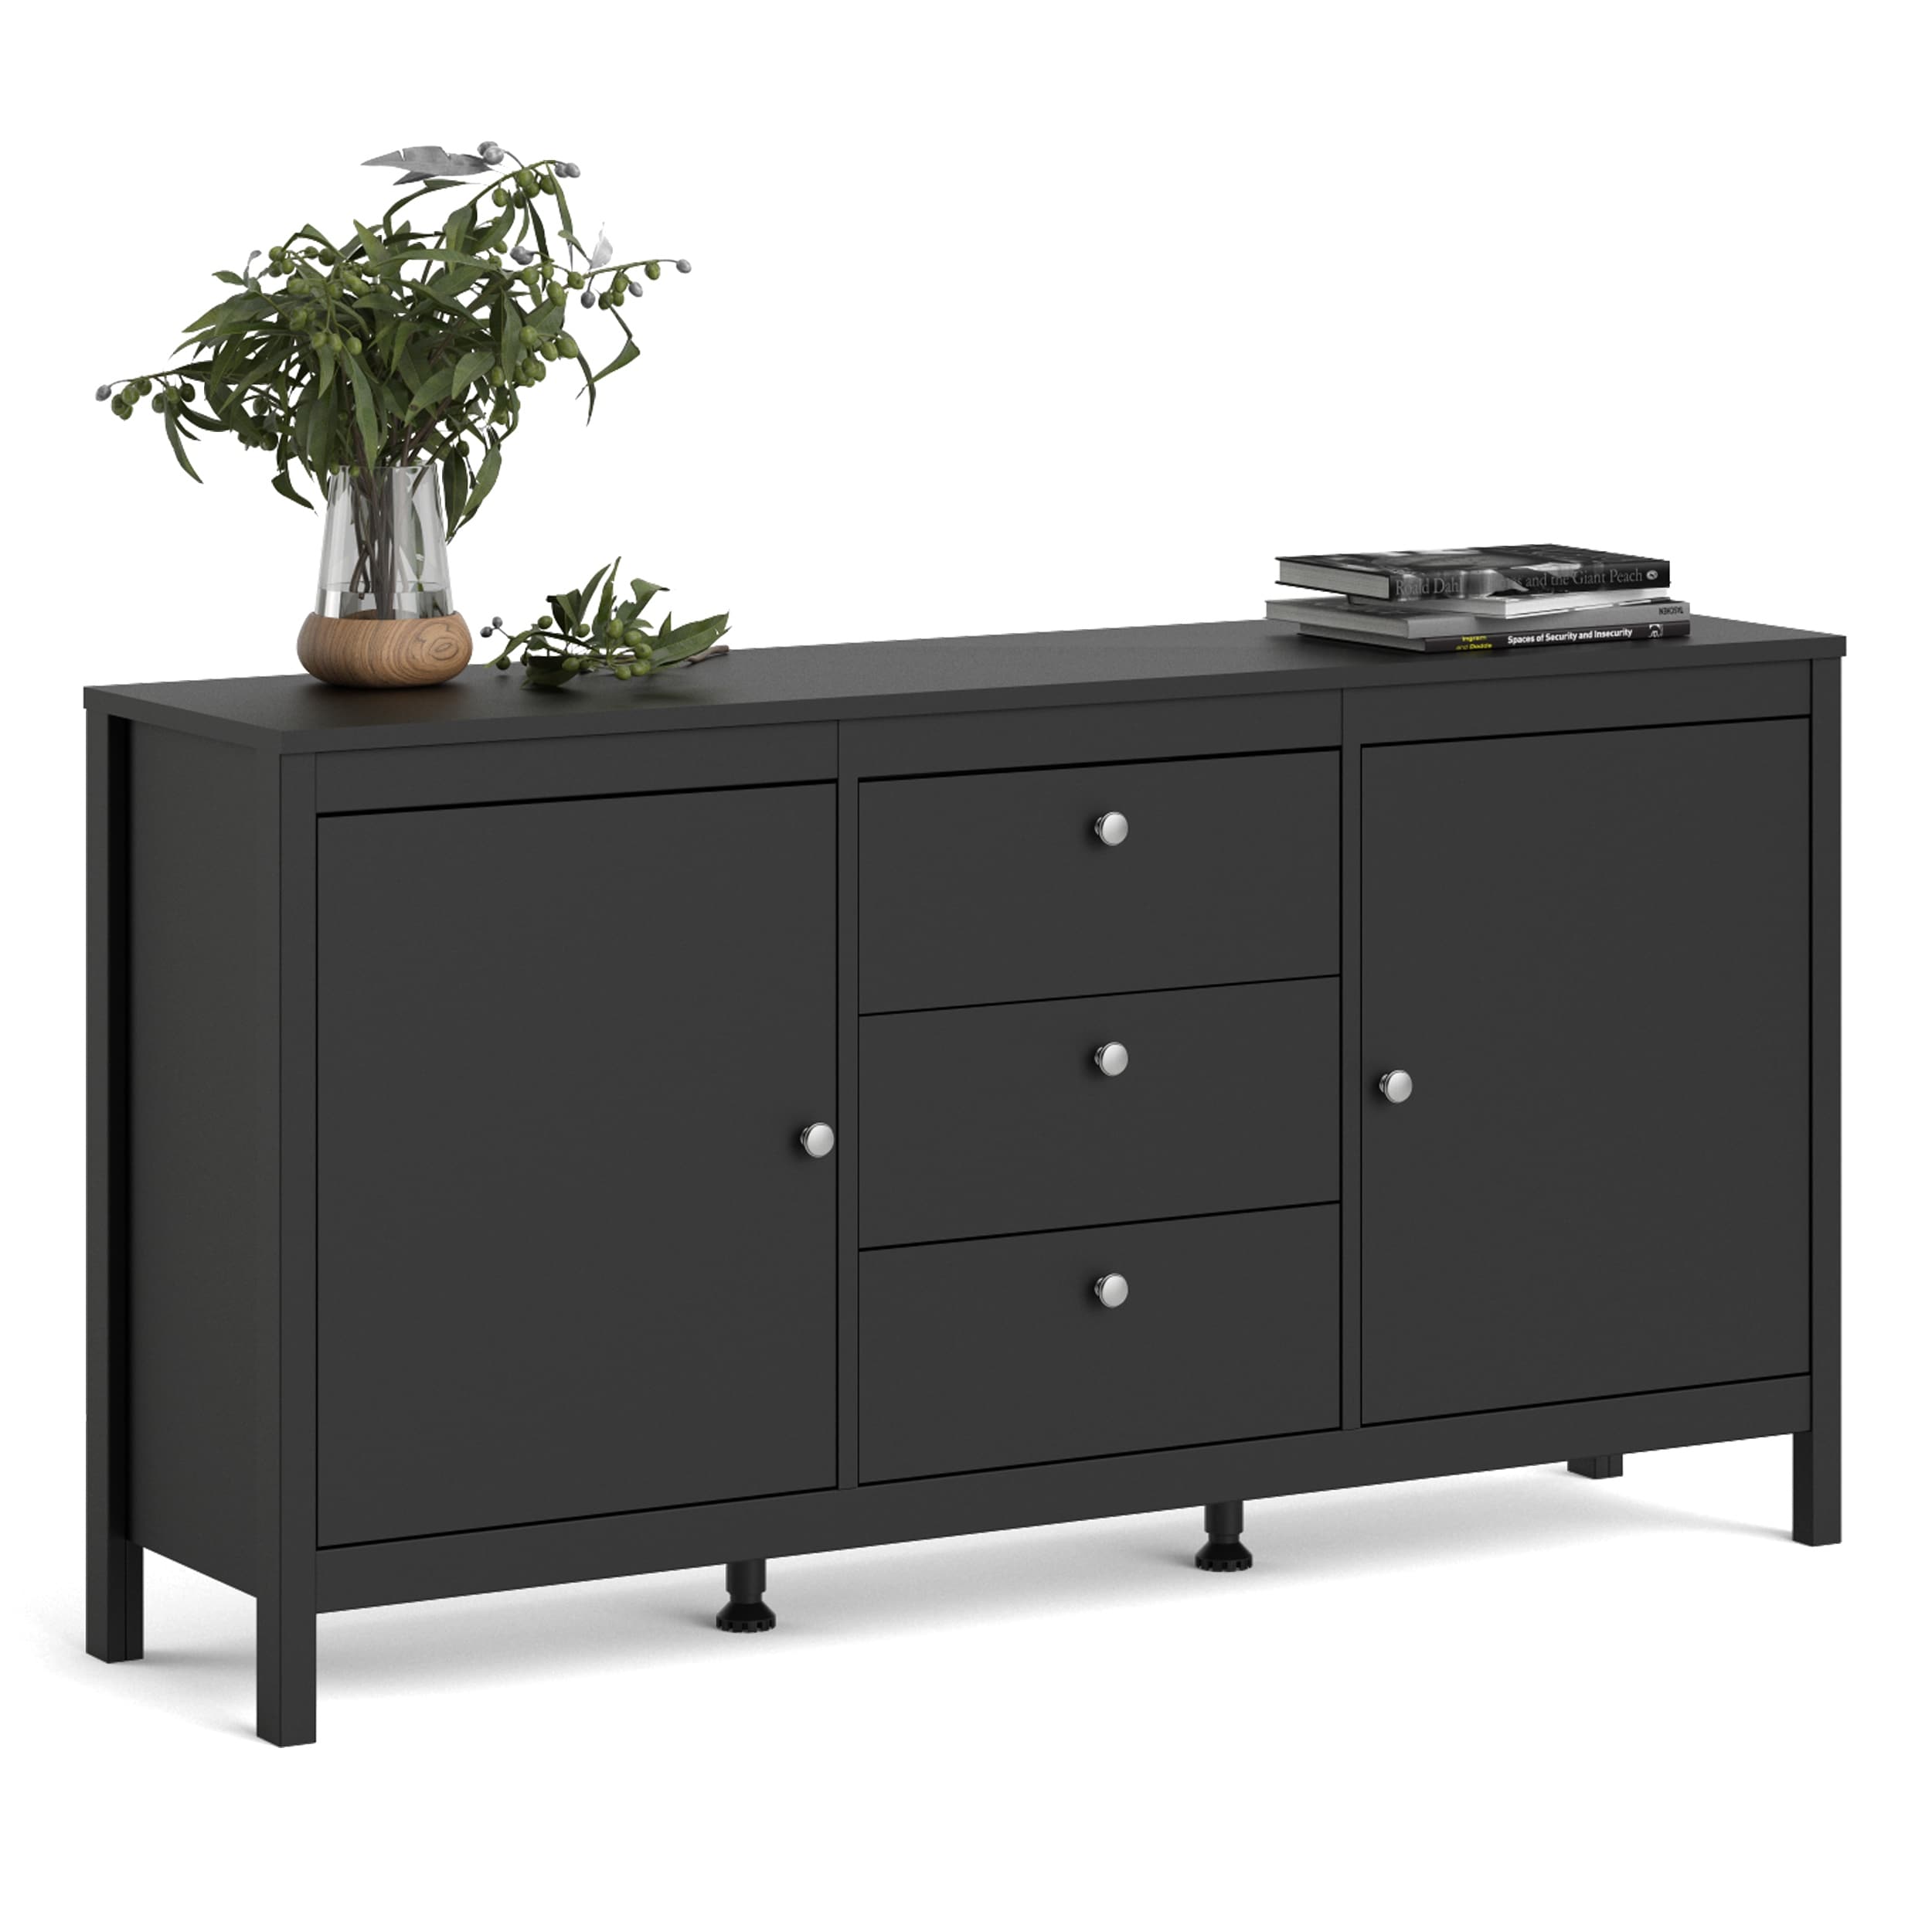 Porch - Bed Madrid & Sale 2-Door & with On Bath Beyond Den 3-Drawers Sideboard - - 33673465